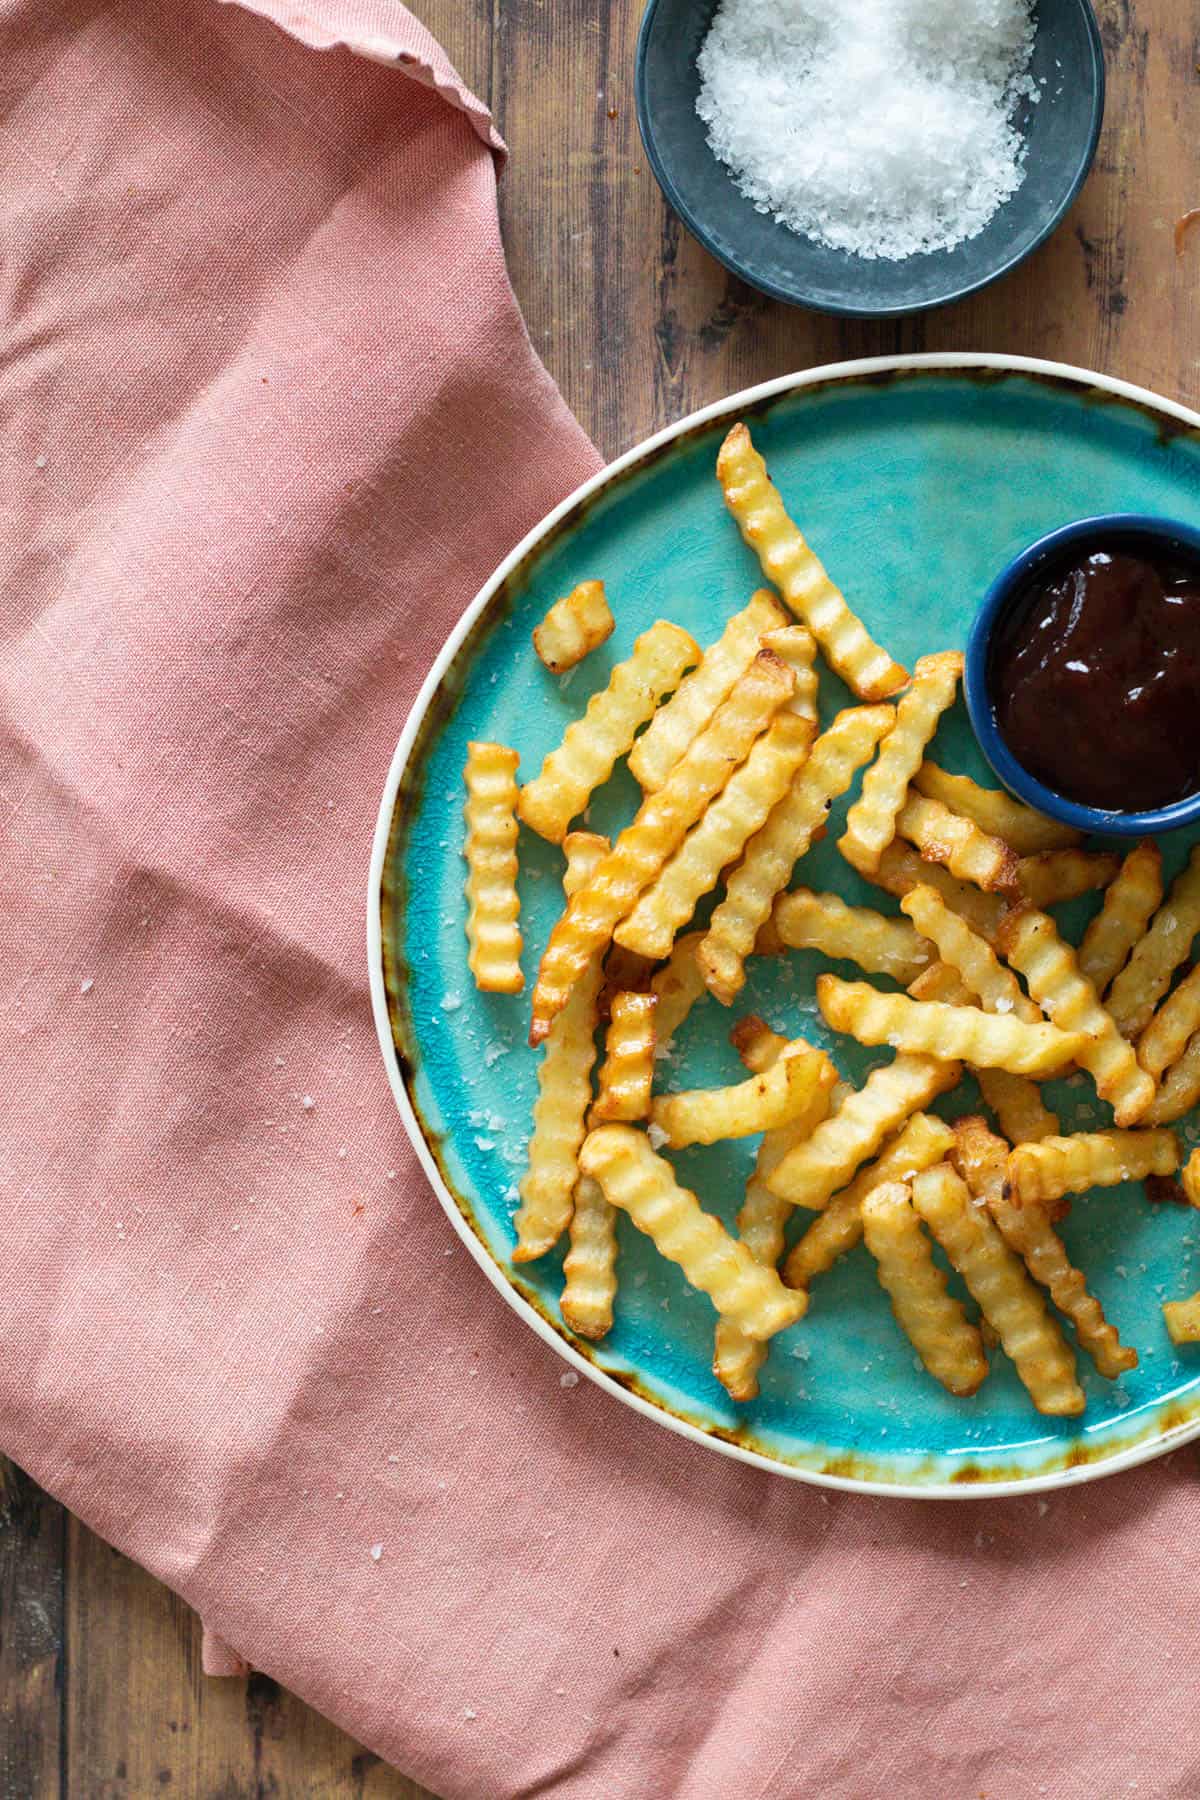 Crinkle fries on a blue plate.